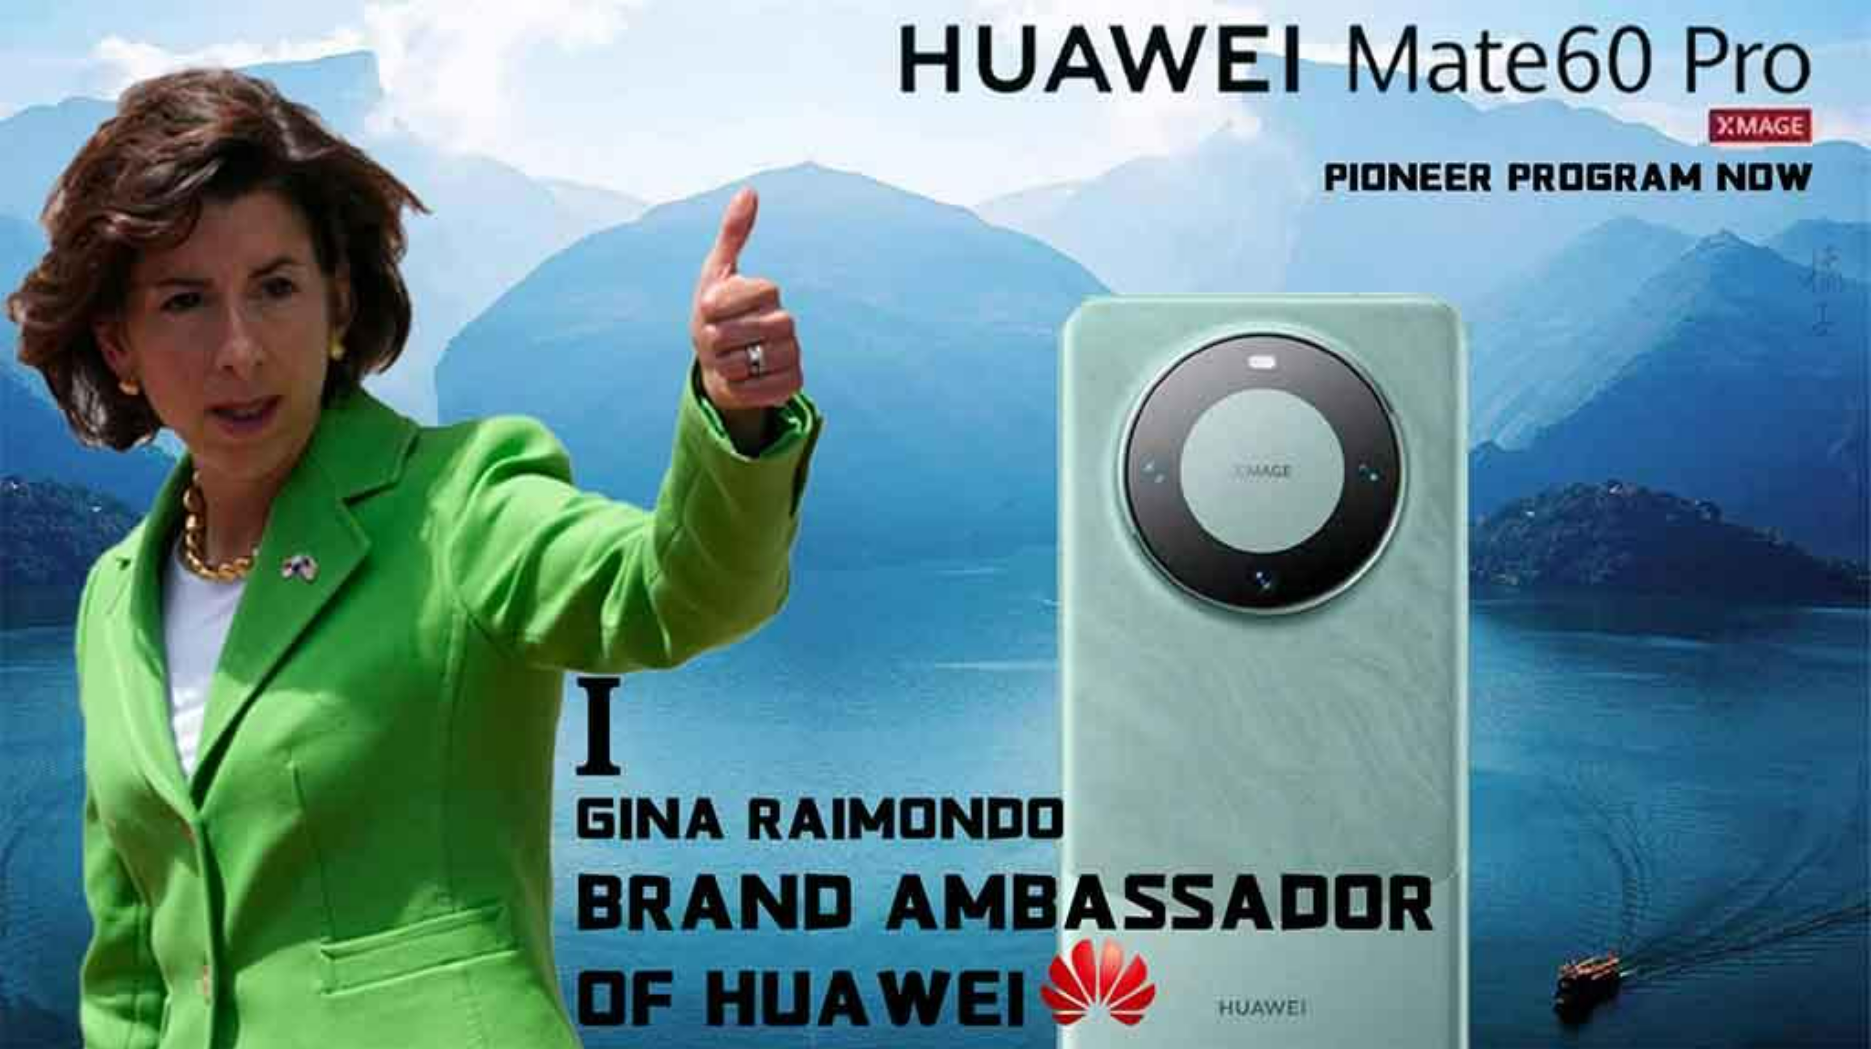 Shut out of Western Markets, Top Exec Arrested, Access to Chips and Other Technologies Denied by the US: Instead of being Destroyed, Huawei is Reemerging Stronger than Ever!